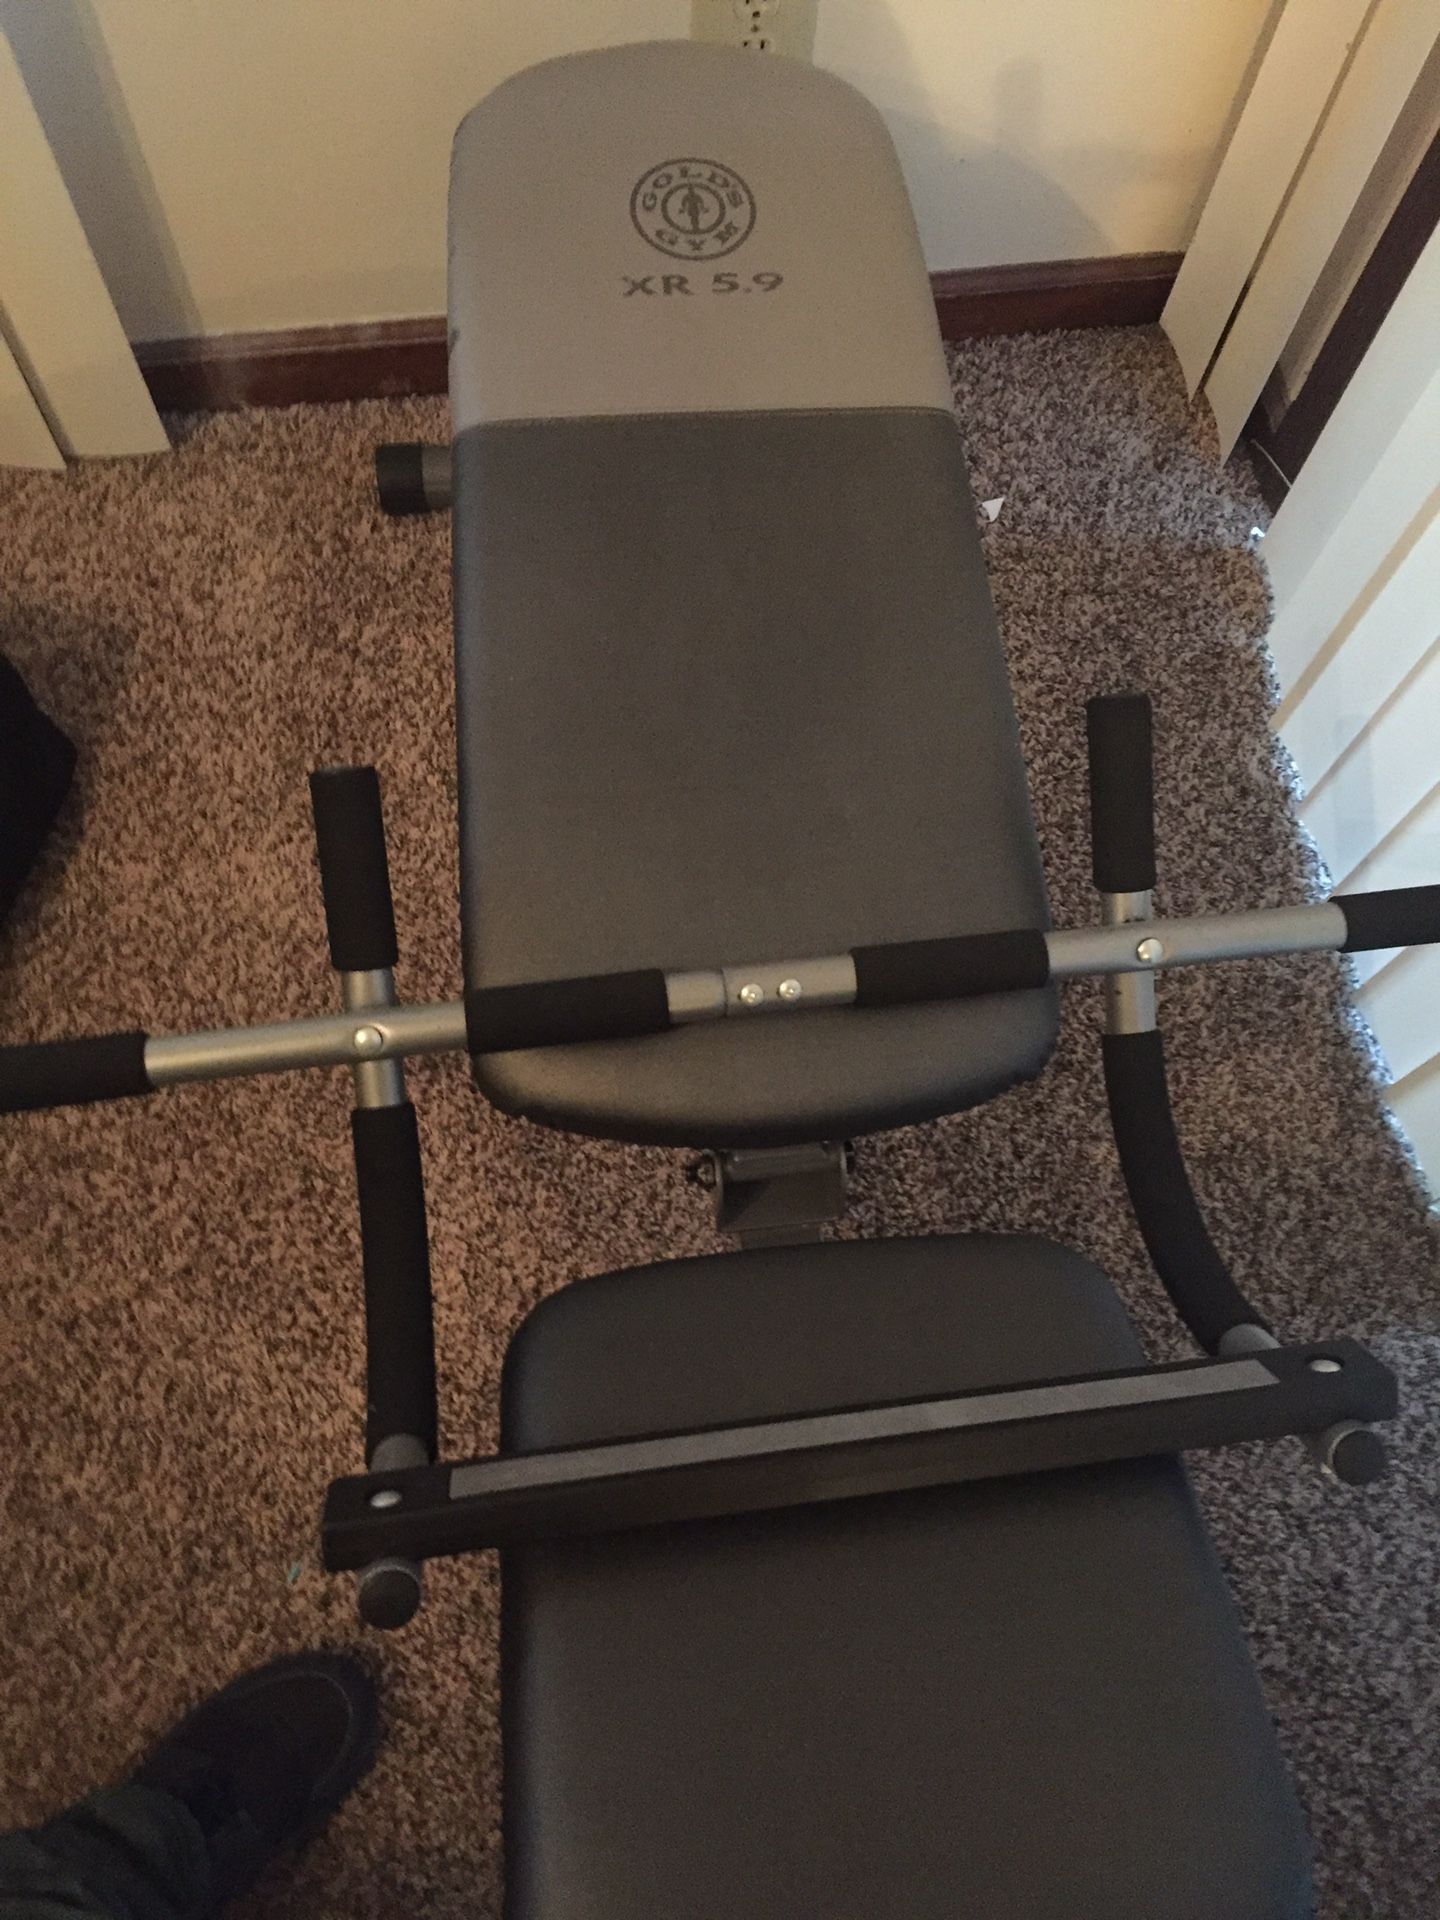 Full work out bench and set with 30 lbs weights and a pull up and push up bar brand new. Will drop off within a close radius.